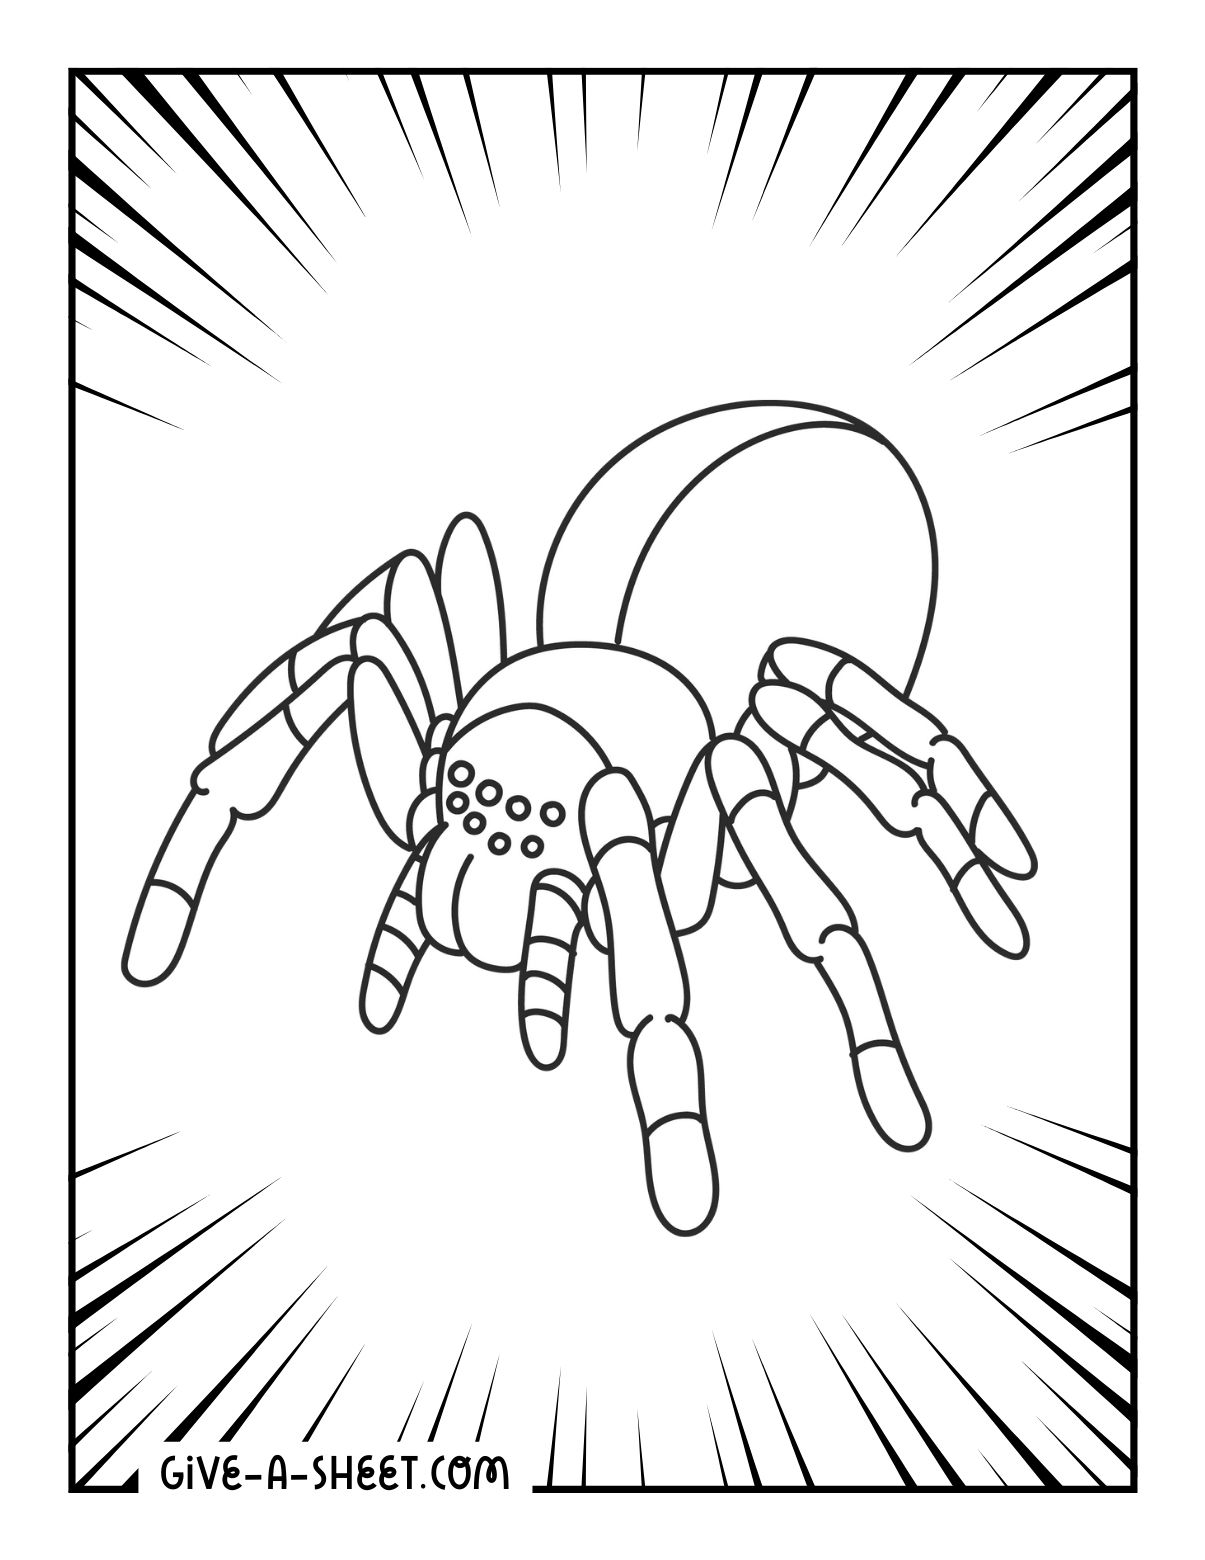 Tarantula on a desert new coloring pages.